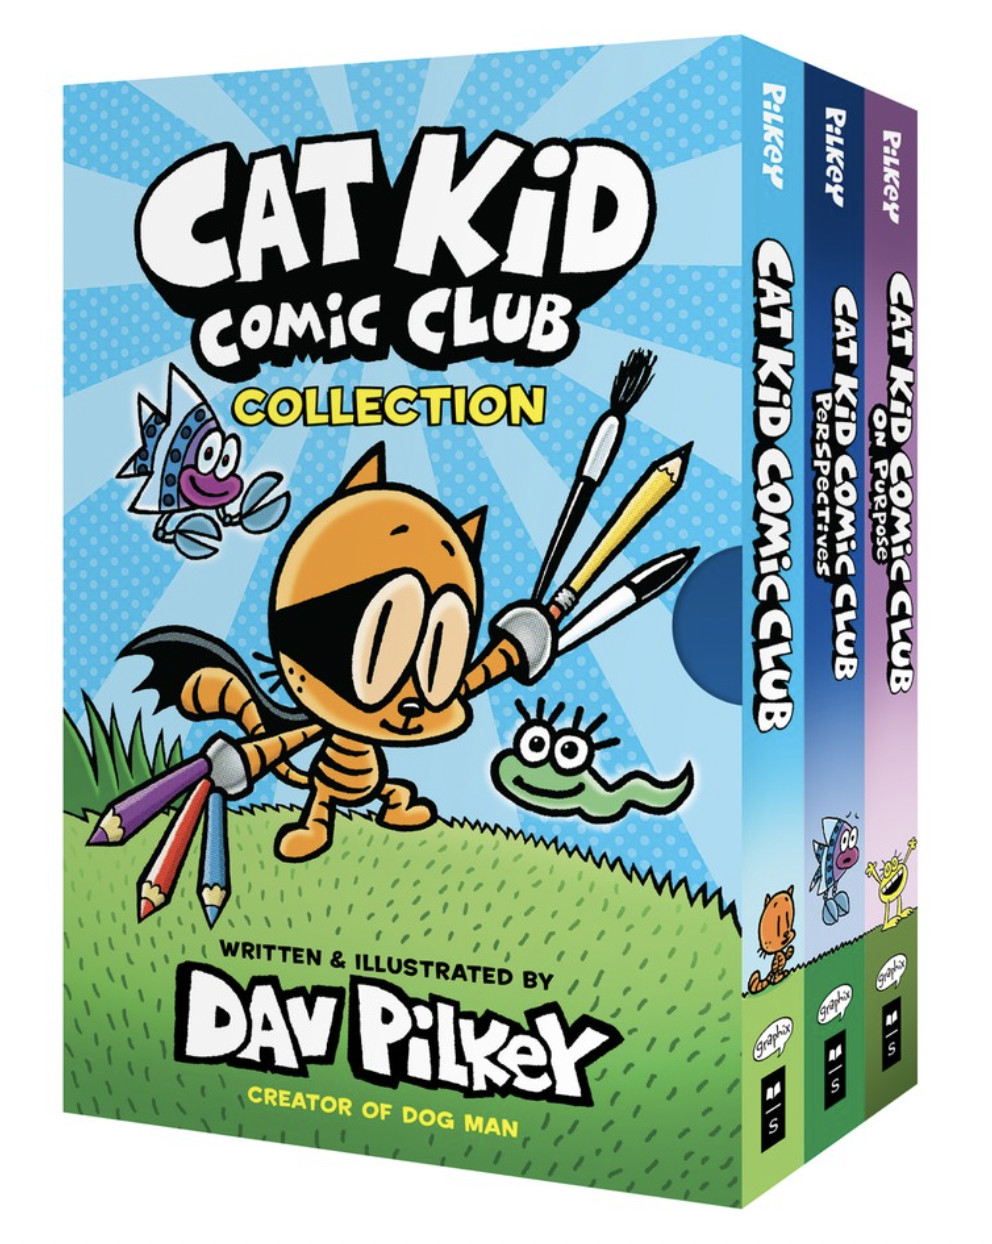 Cat Kid Comic Club (Cat Kid Comic Club Book 3) Book Collection by Dav Pilkey